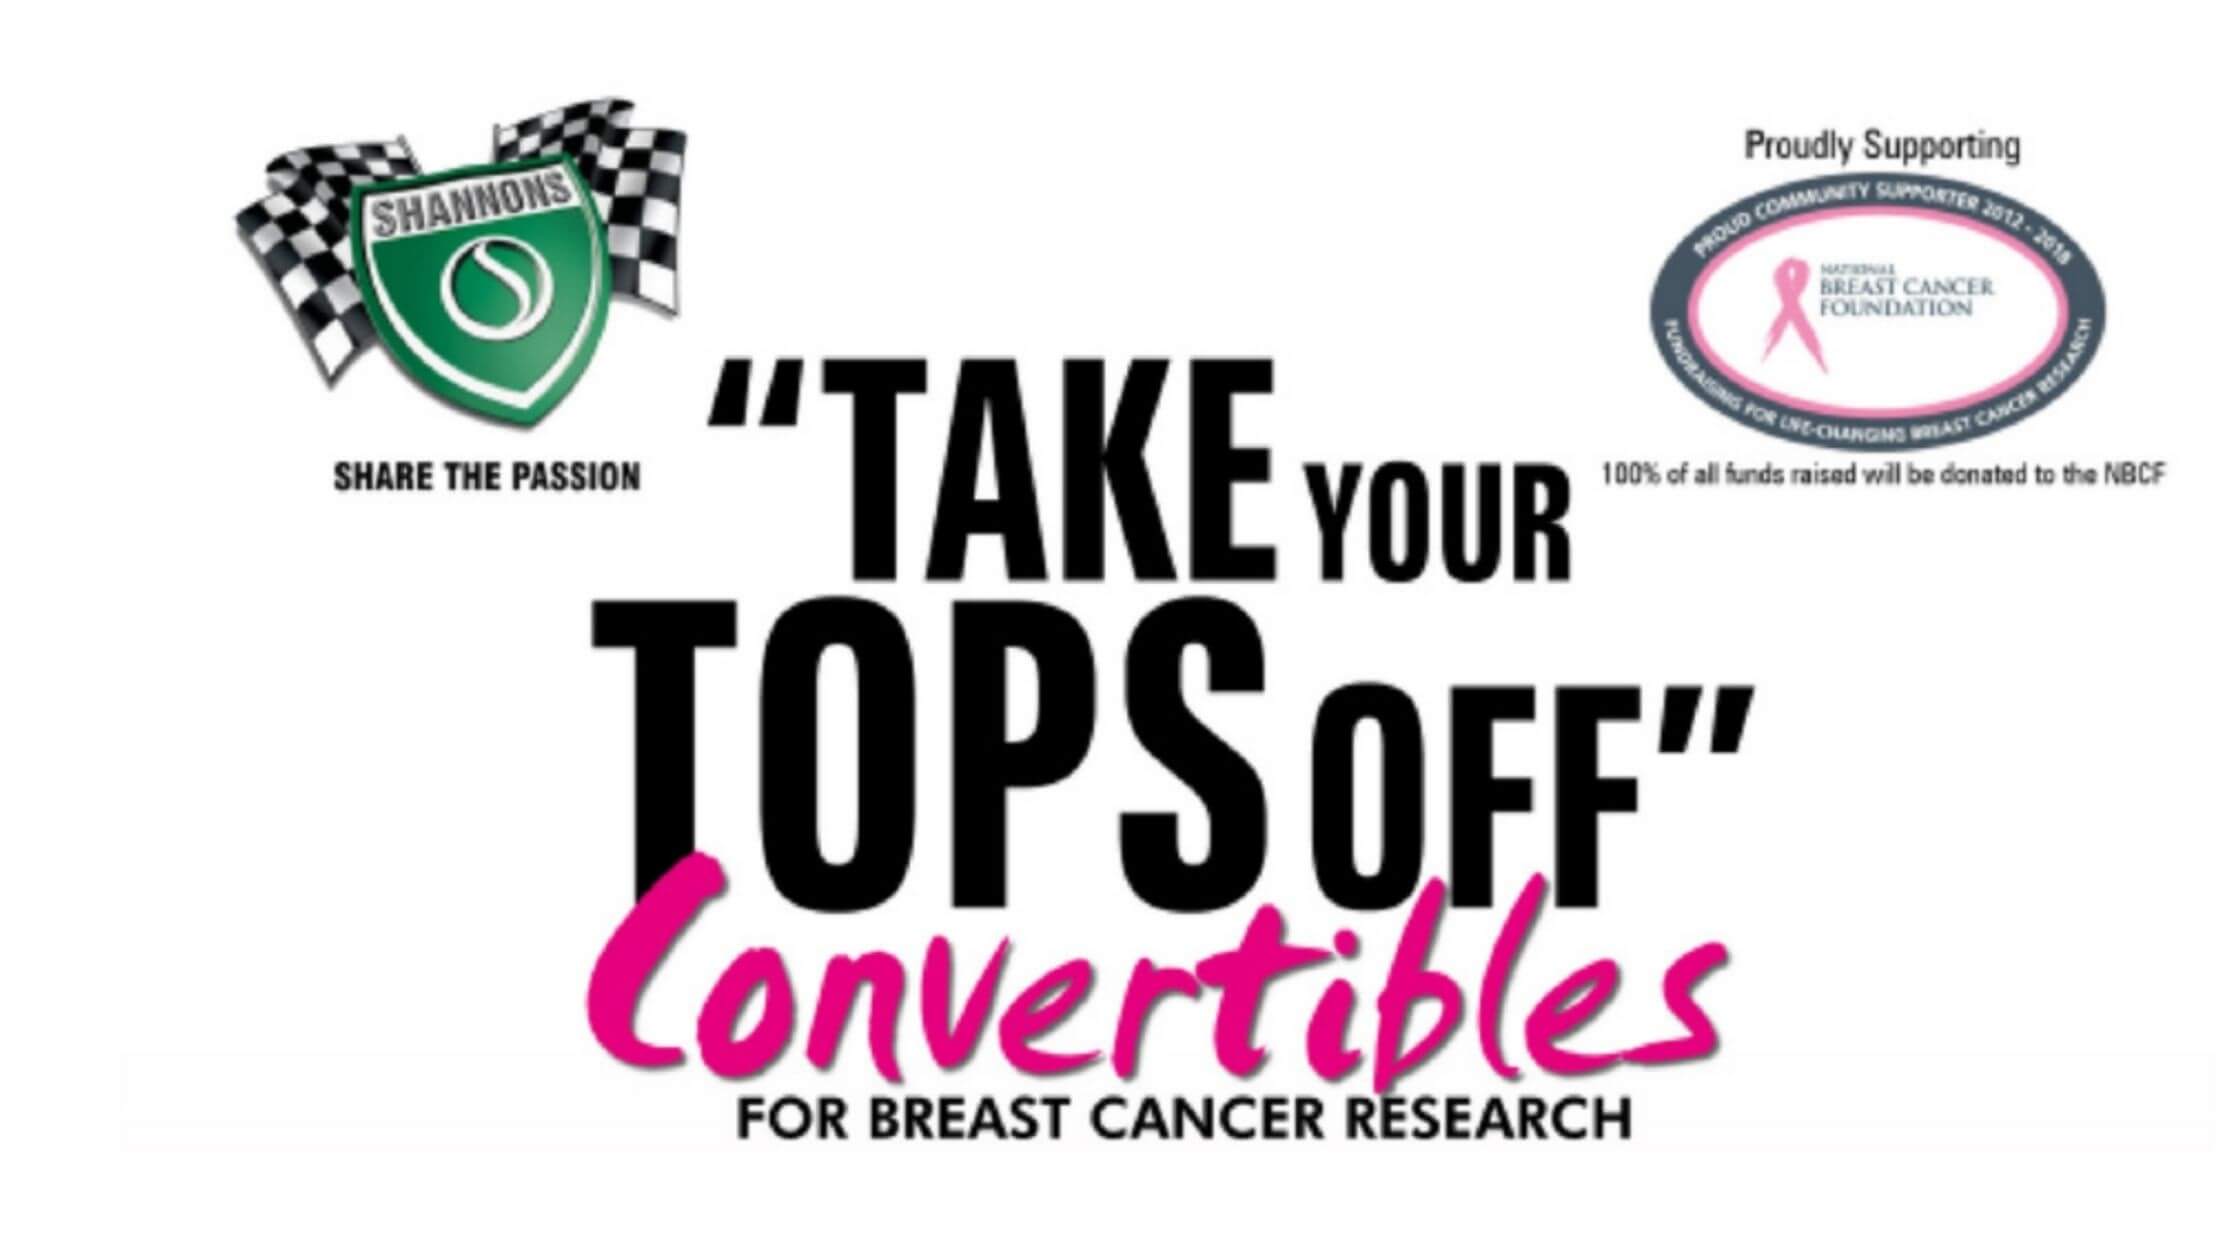 Shannons Take Your Tops Off for Breast Cancer Research